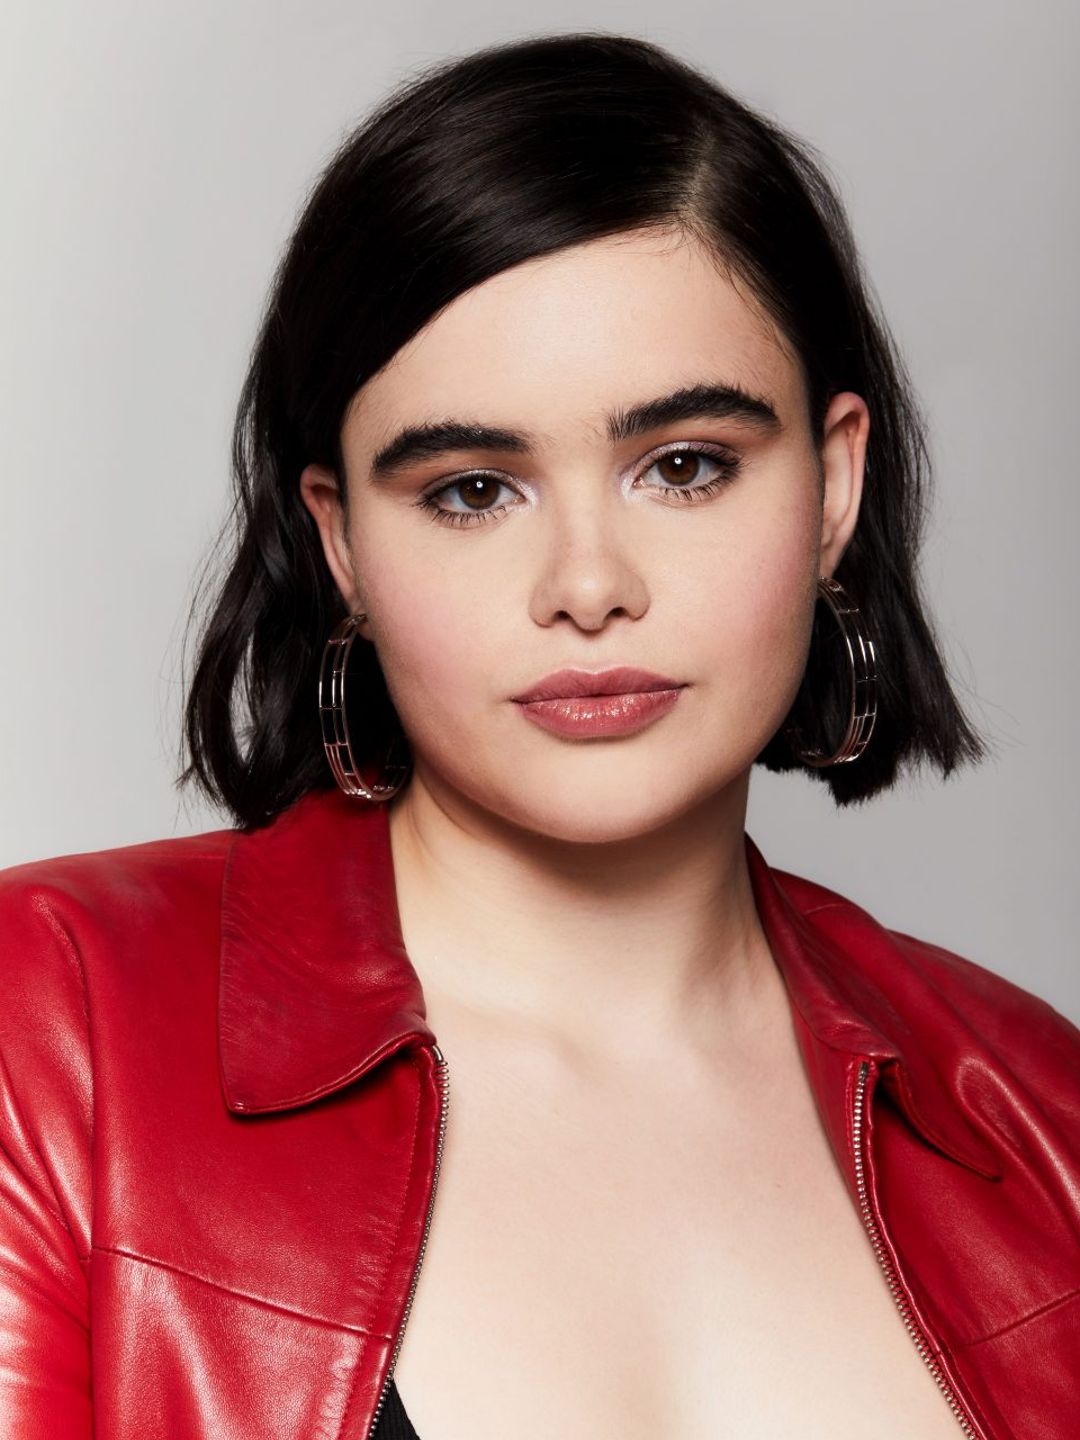 Barbie Ferreira young age